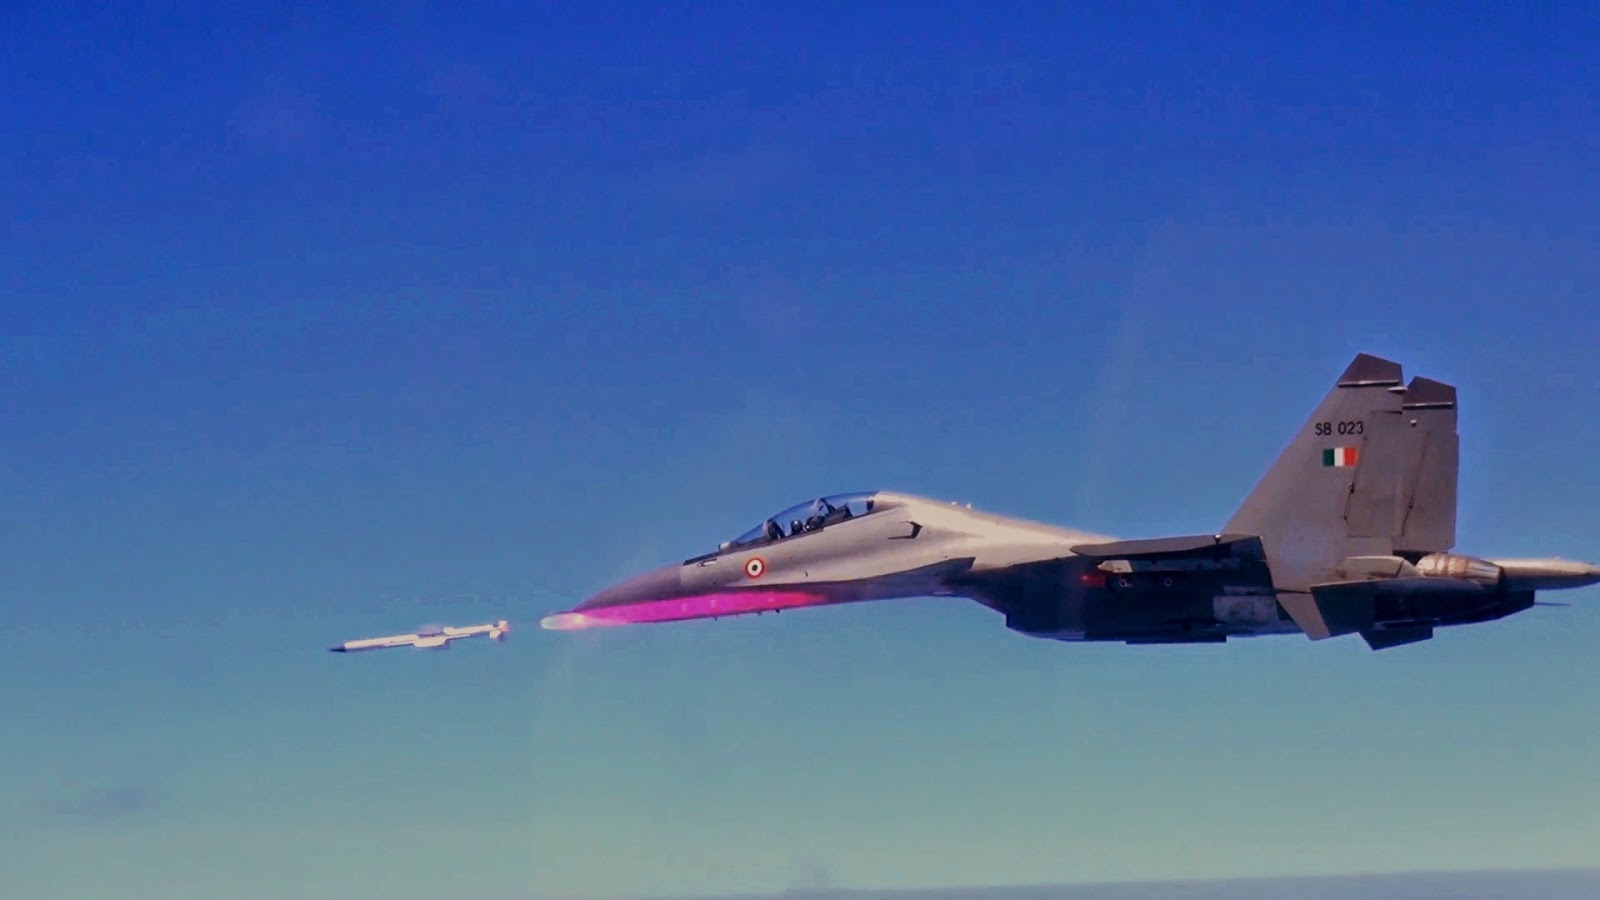 Astra missile, Indian Air Force, IAF, Air-to-Air Missile, BVRAAM, Air Force Station, Defence Research and Development Organisation, DRDO, National news